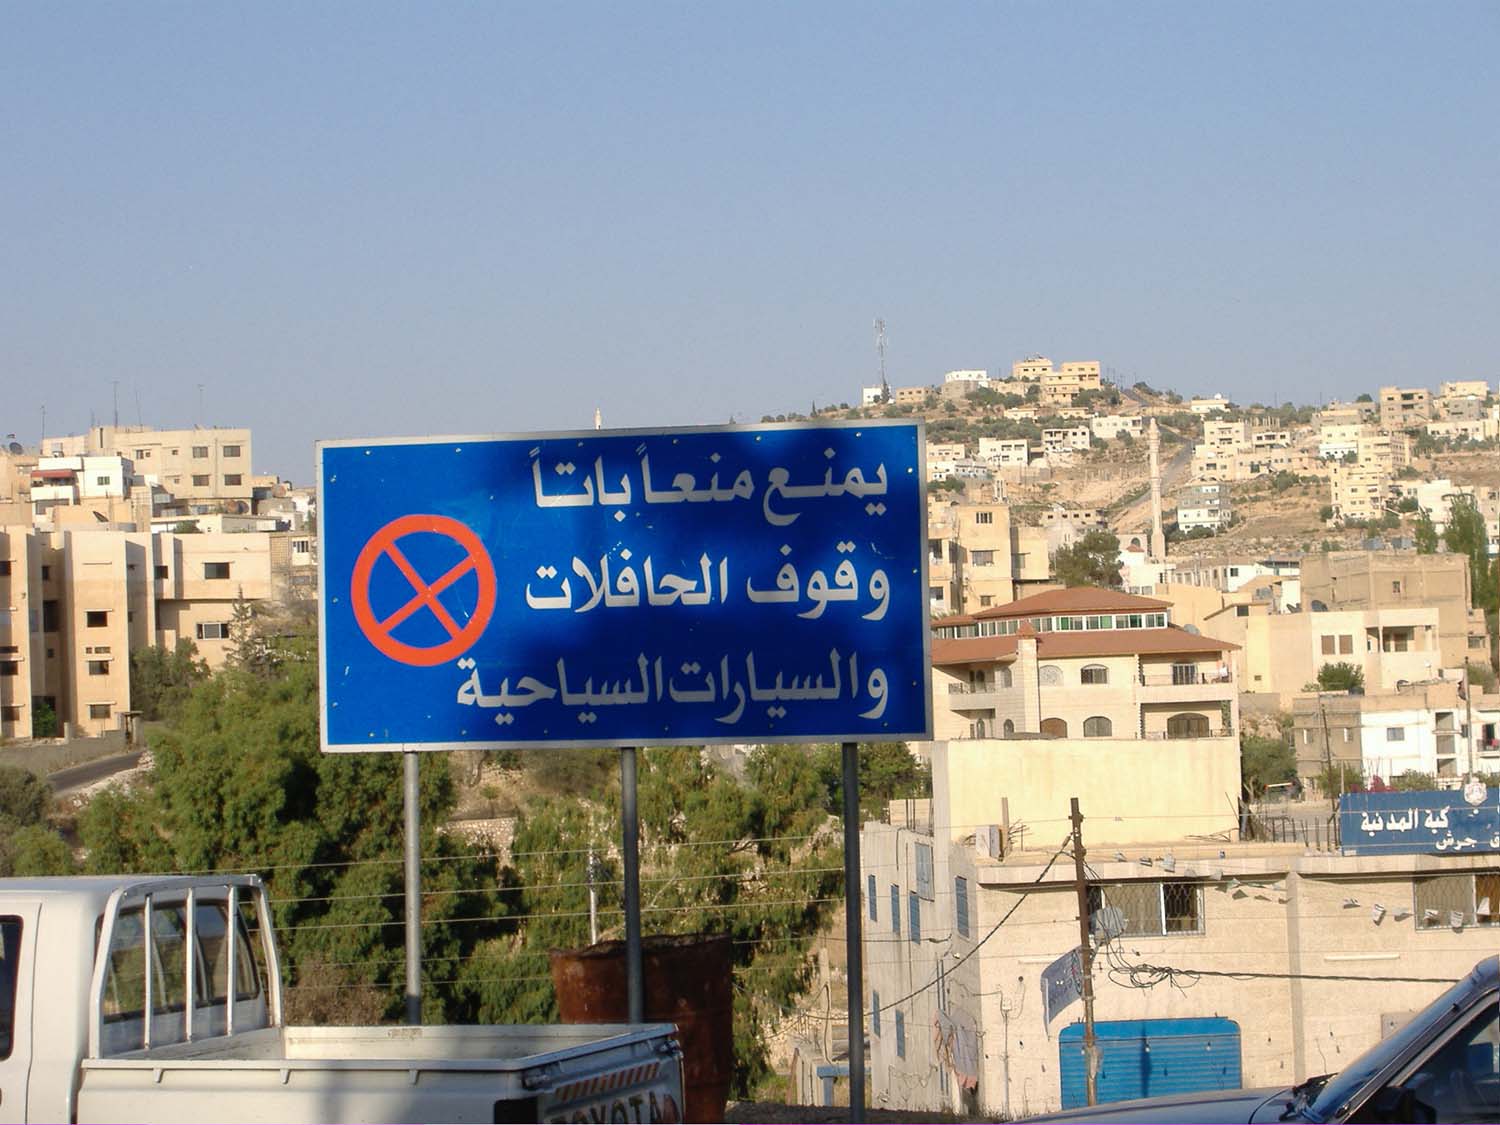  Jerash - View of a sign prohibiting the parking of tour buses, with housing behind